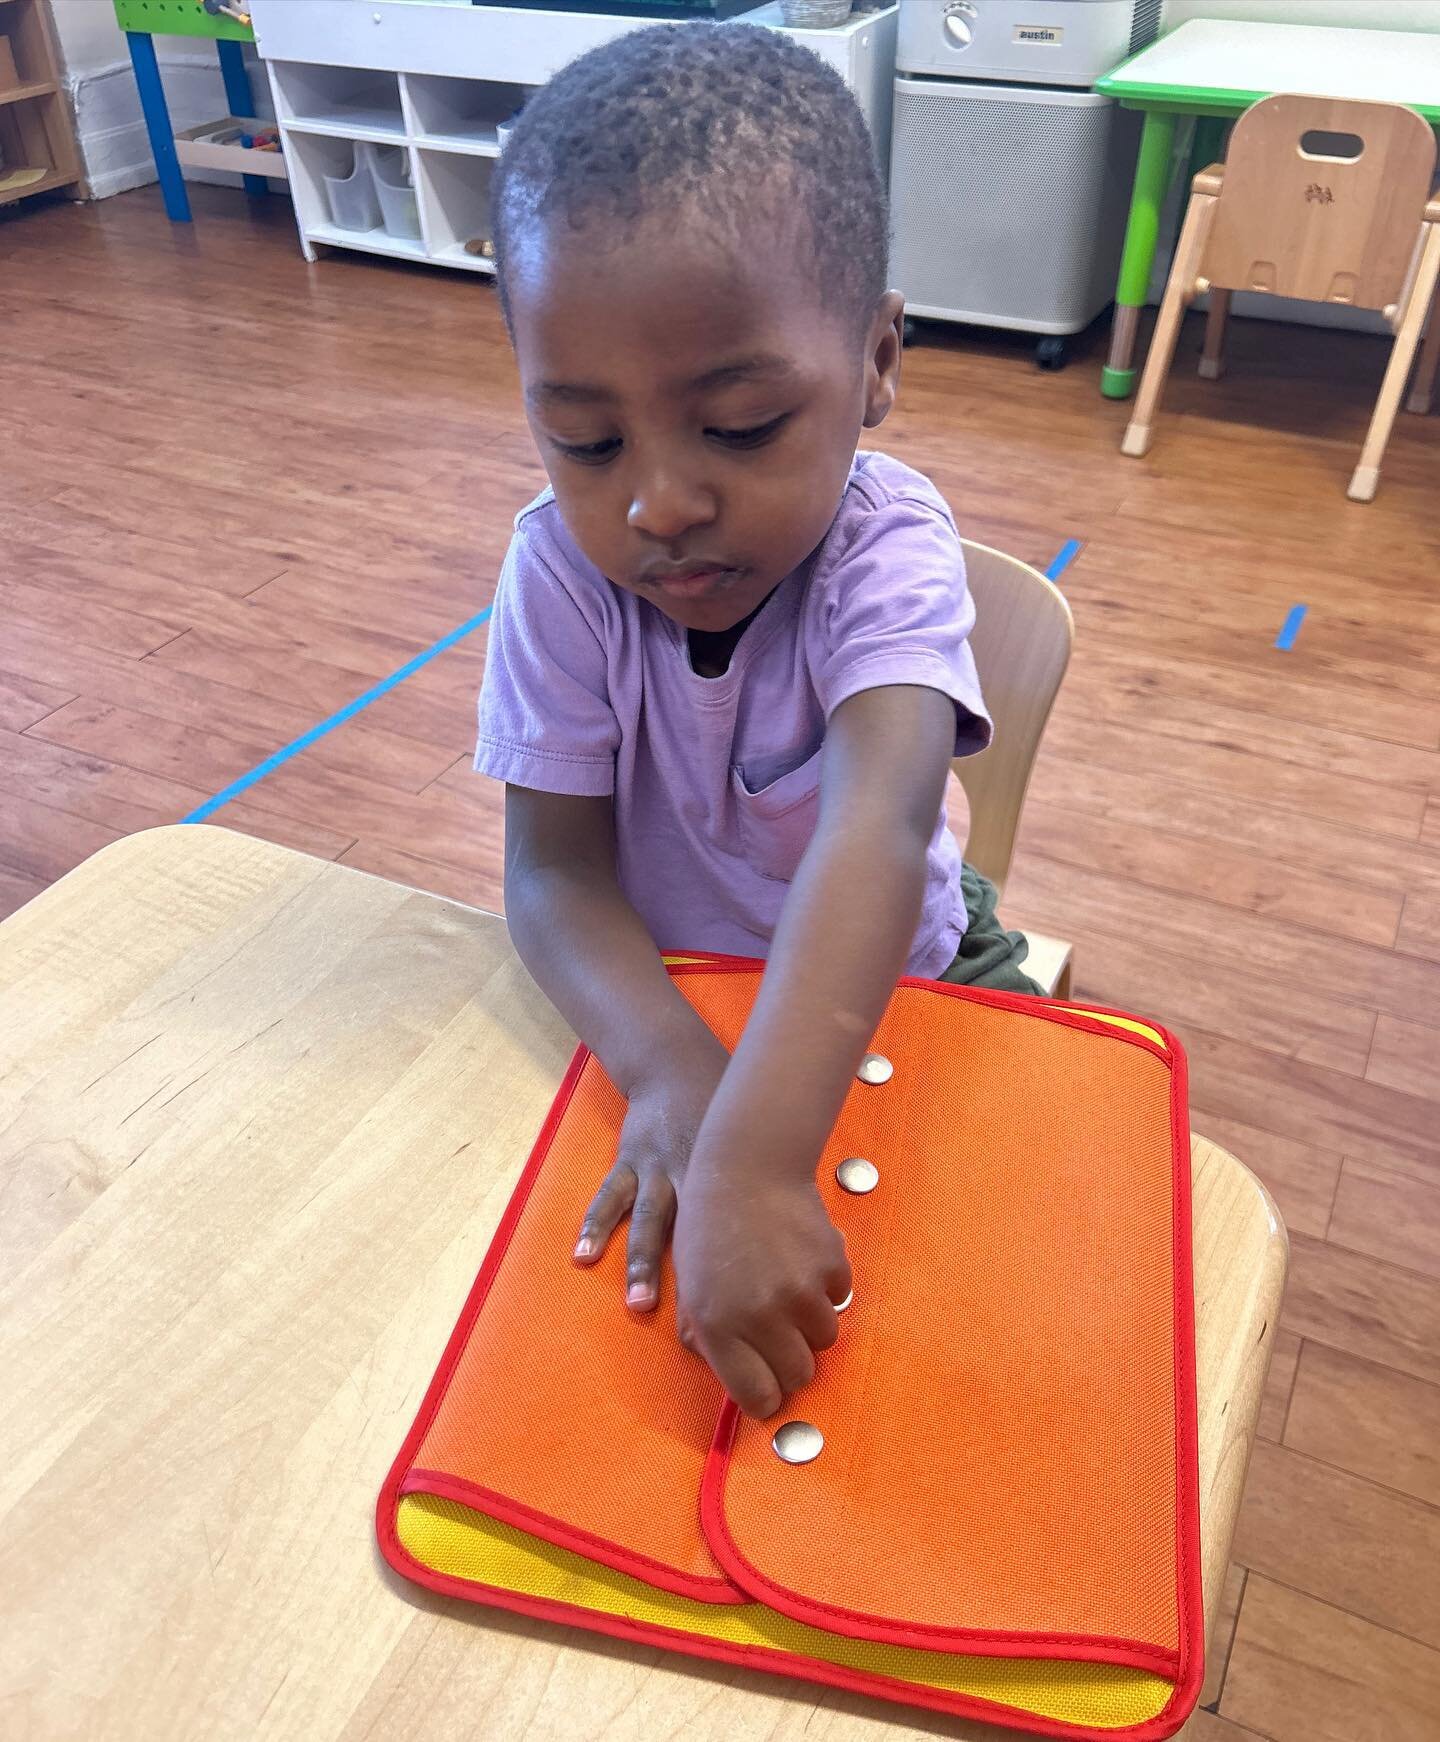 Dressing Frames are a staple on the Practical Life shelves in a Montessori classroom. They allow children to practice a variety of closures they might encounter on different types of clothing. Children in our Toddler Program begin by working on zippi